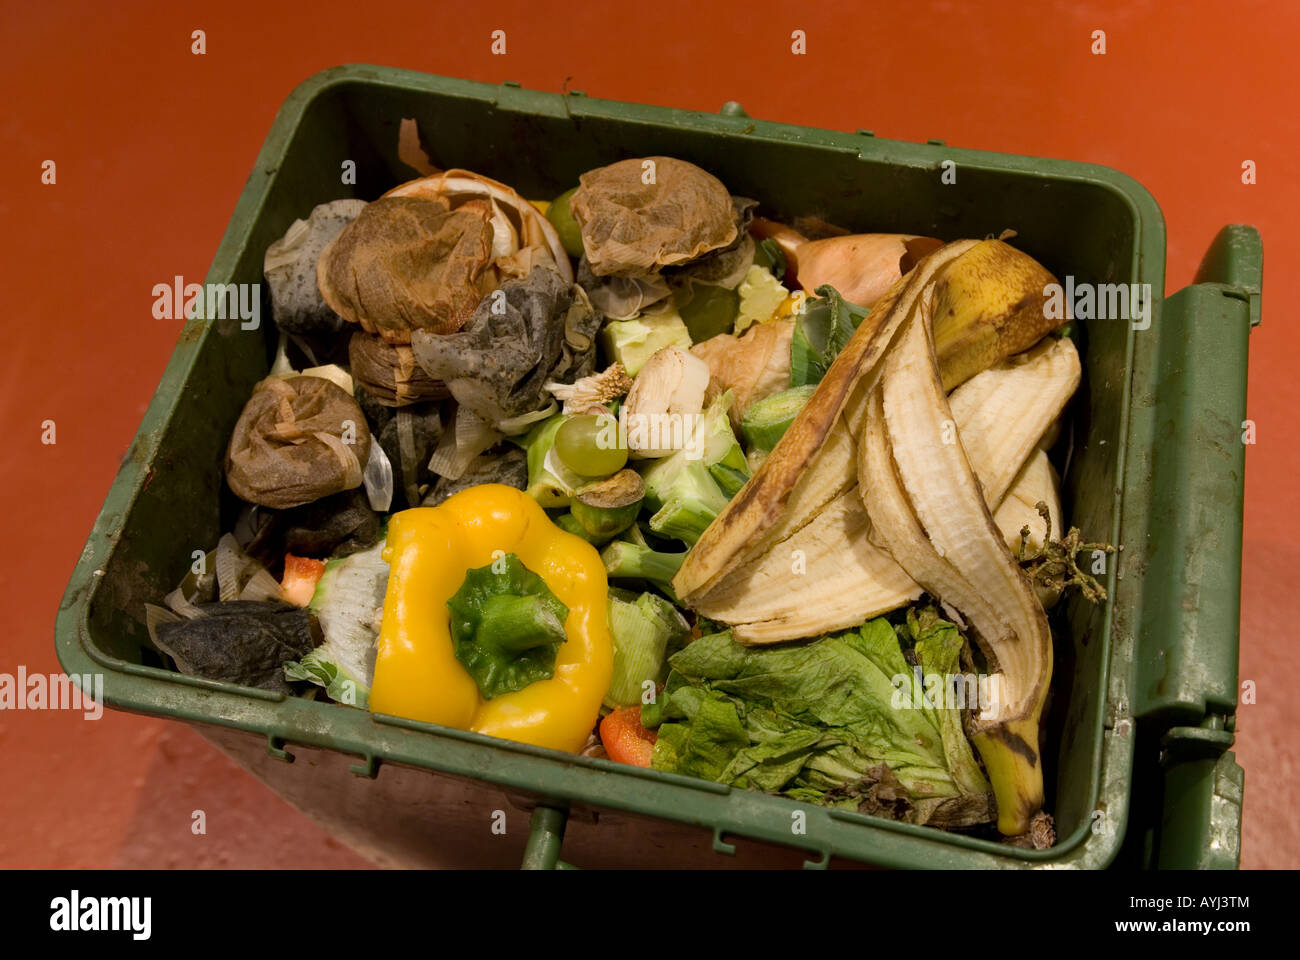 waste green food in a kitchen compost bin Stock Photo